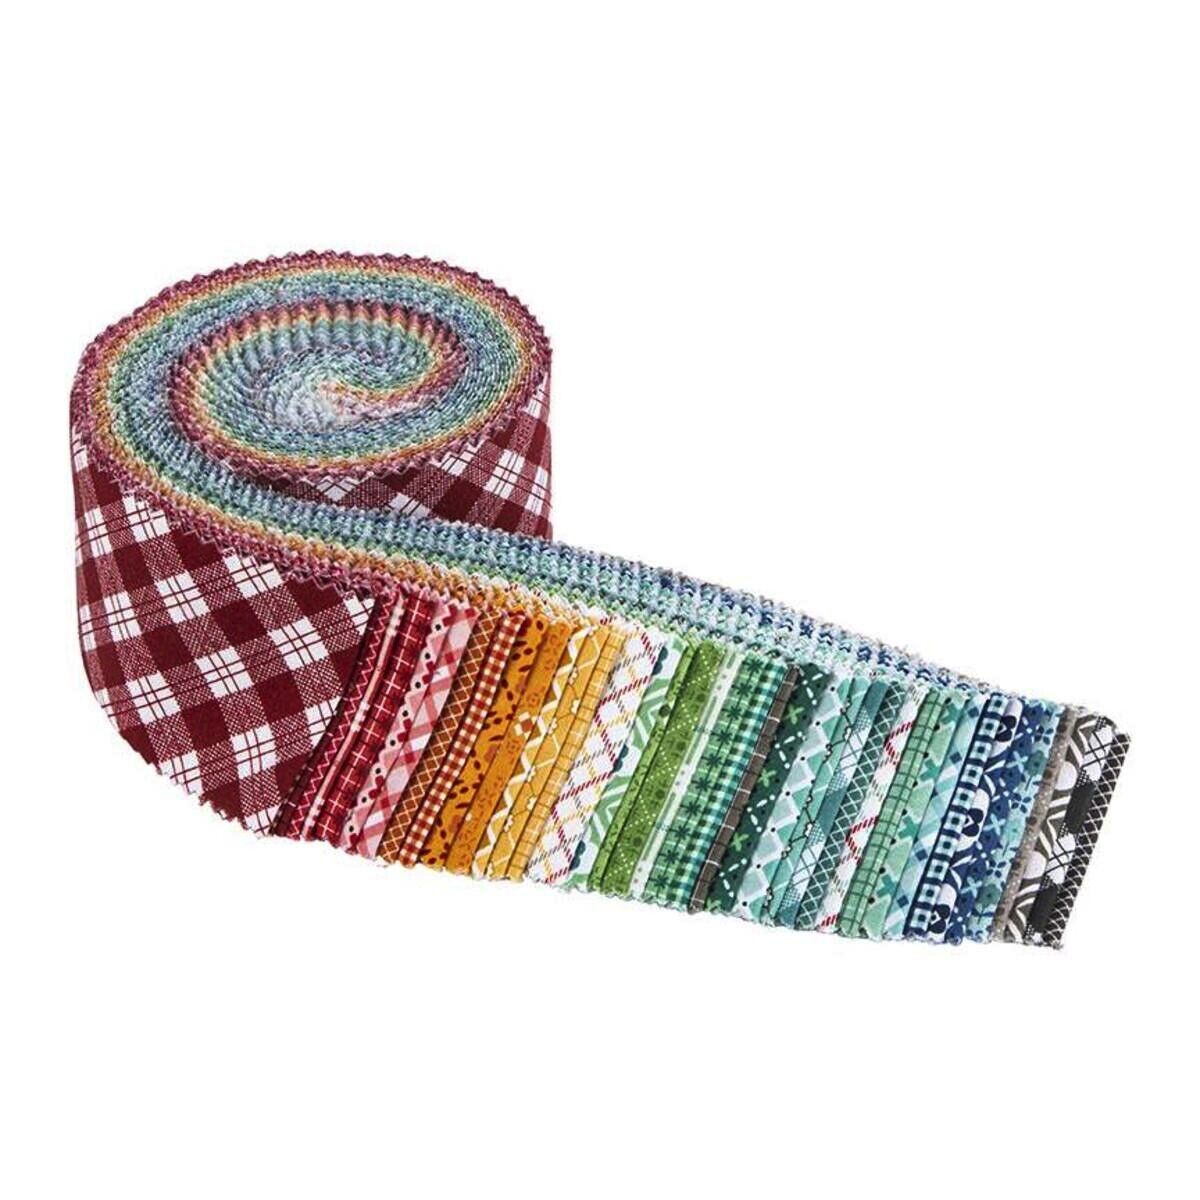 Bee Plaids by Lori Holt - 2.5" Rollie Polie Fabric Roll - 40 strips